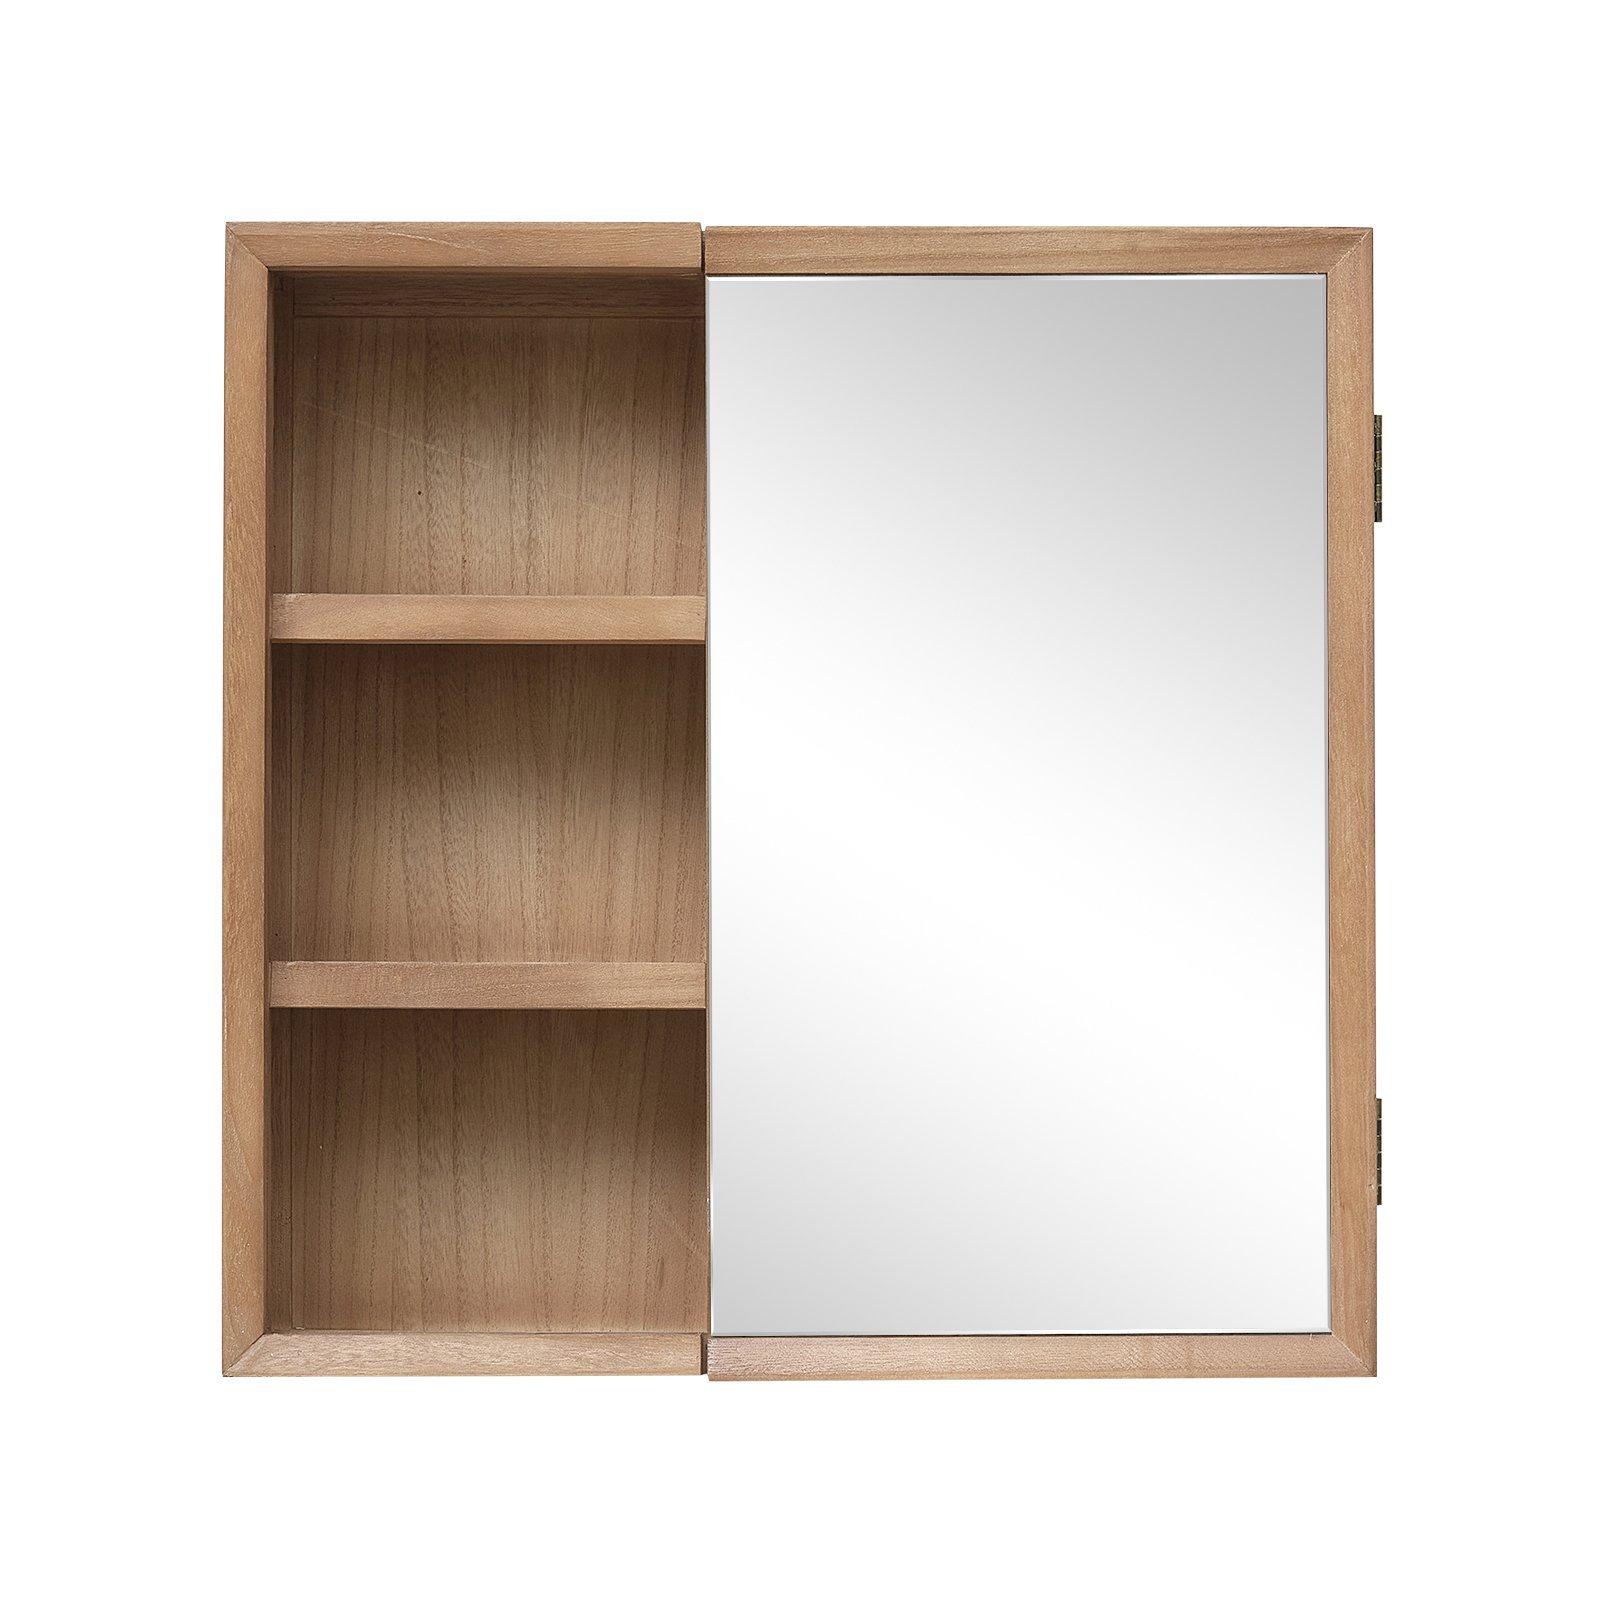 Wooden Open Shelved Mirrored Wall Cabinet 53cm X 53cm